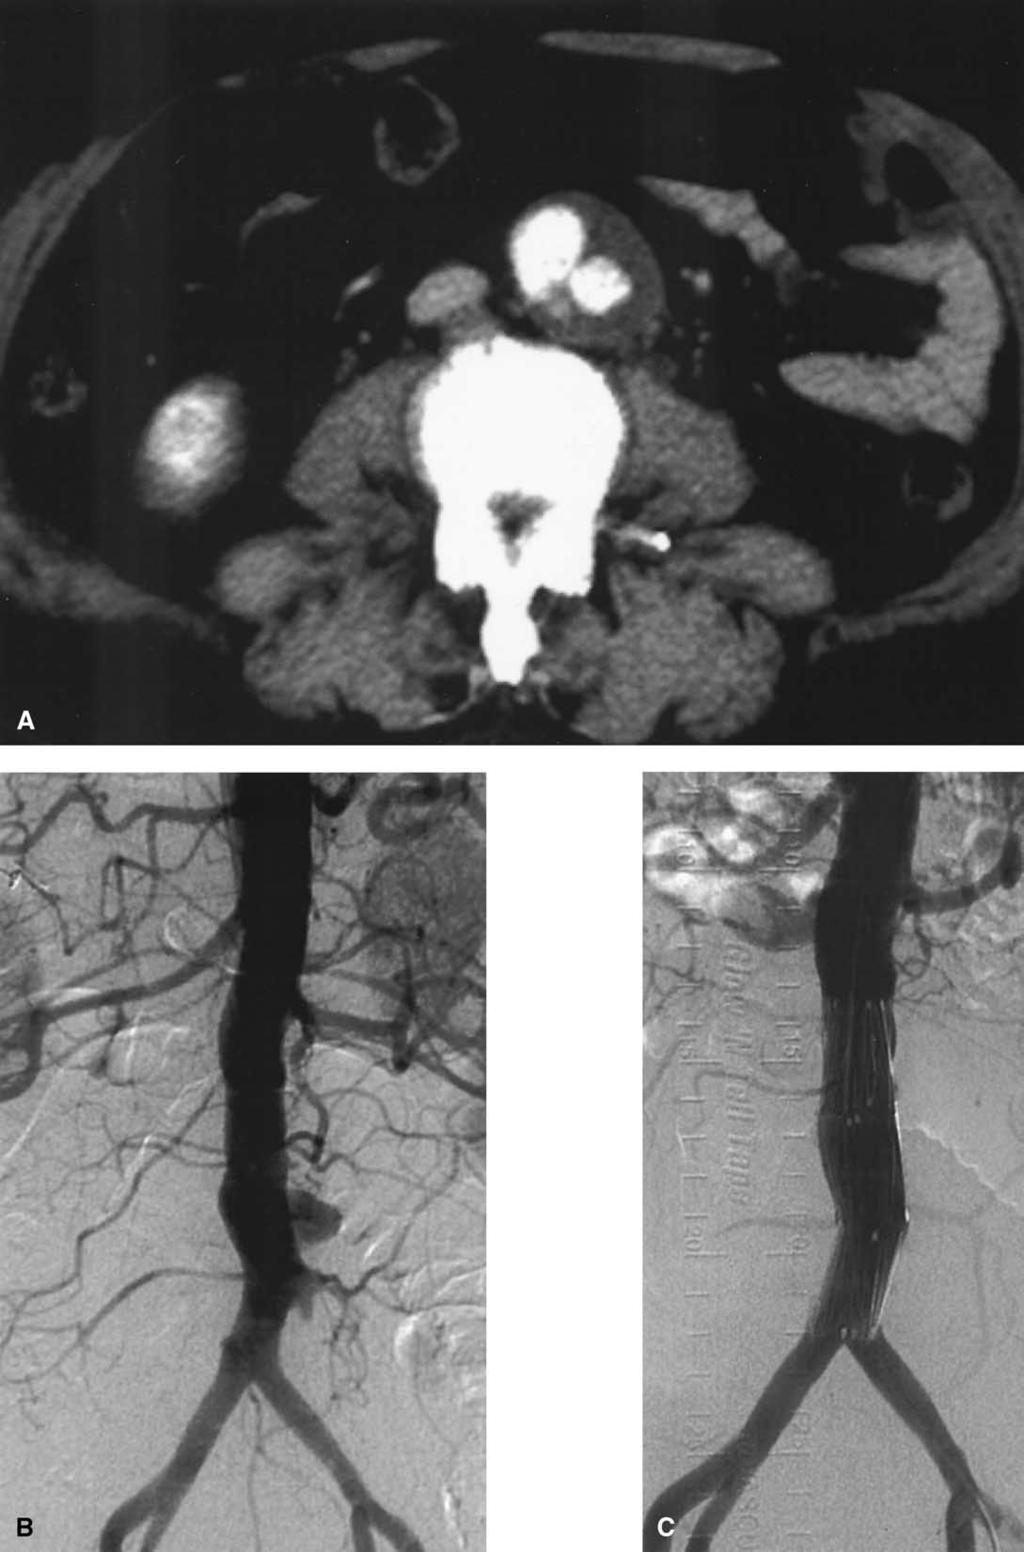 JOURNAL OF VASCULAR SURGERY Volume 38, Number 2 Tsuji et al 385 Fig 2. Patient 1. Penetrating atherosclerotic ulcer in the abdominal aorta, with intramural hematoma.